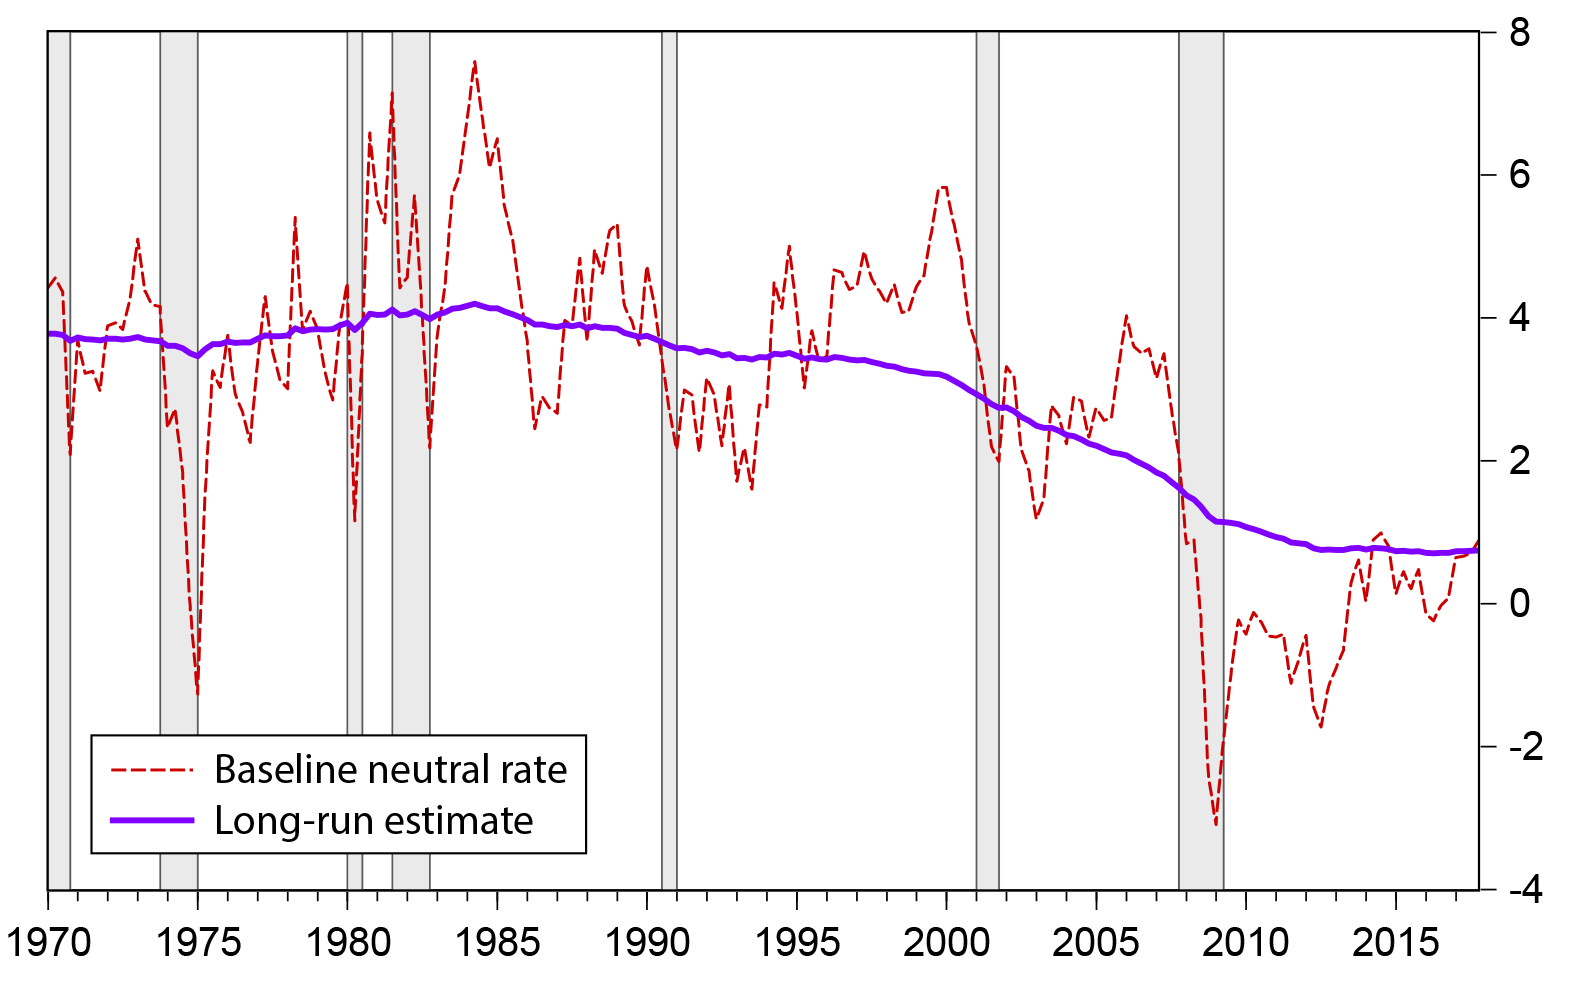 Figure 5. Model estimate of long-run neutral rate. See accessible link for data description.